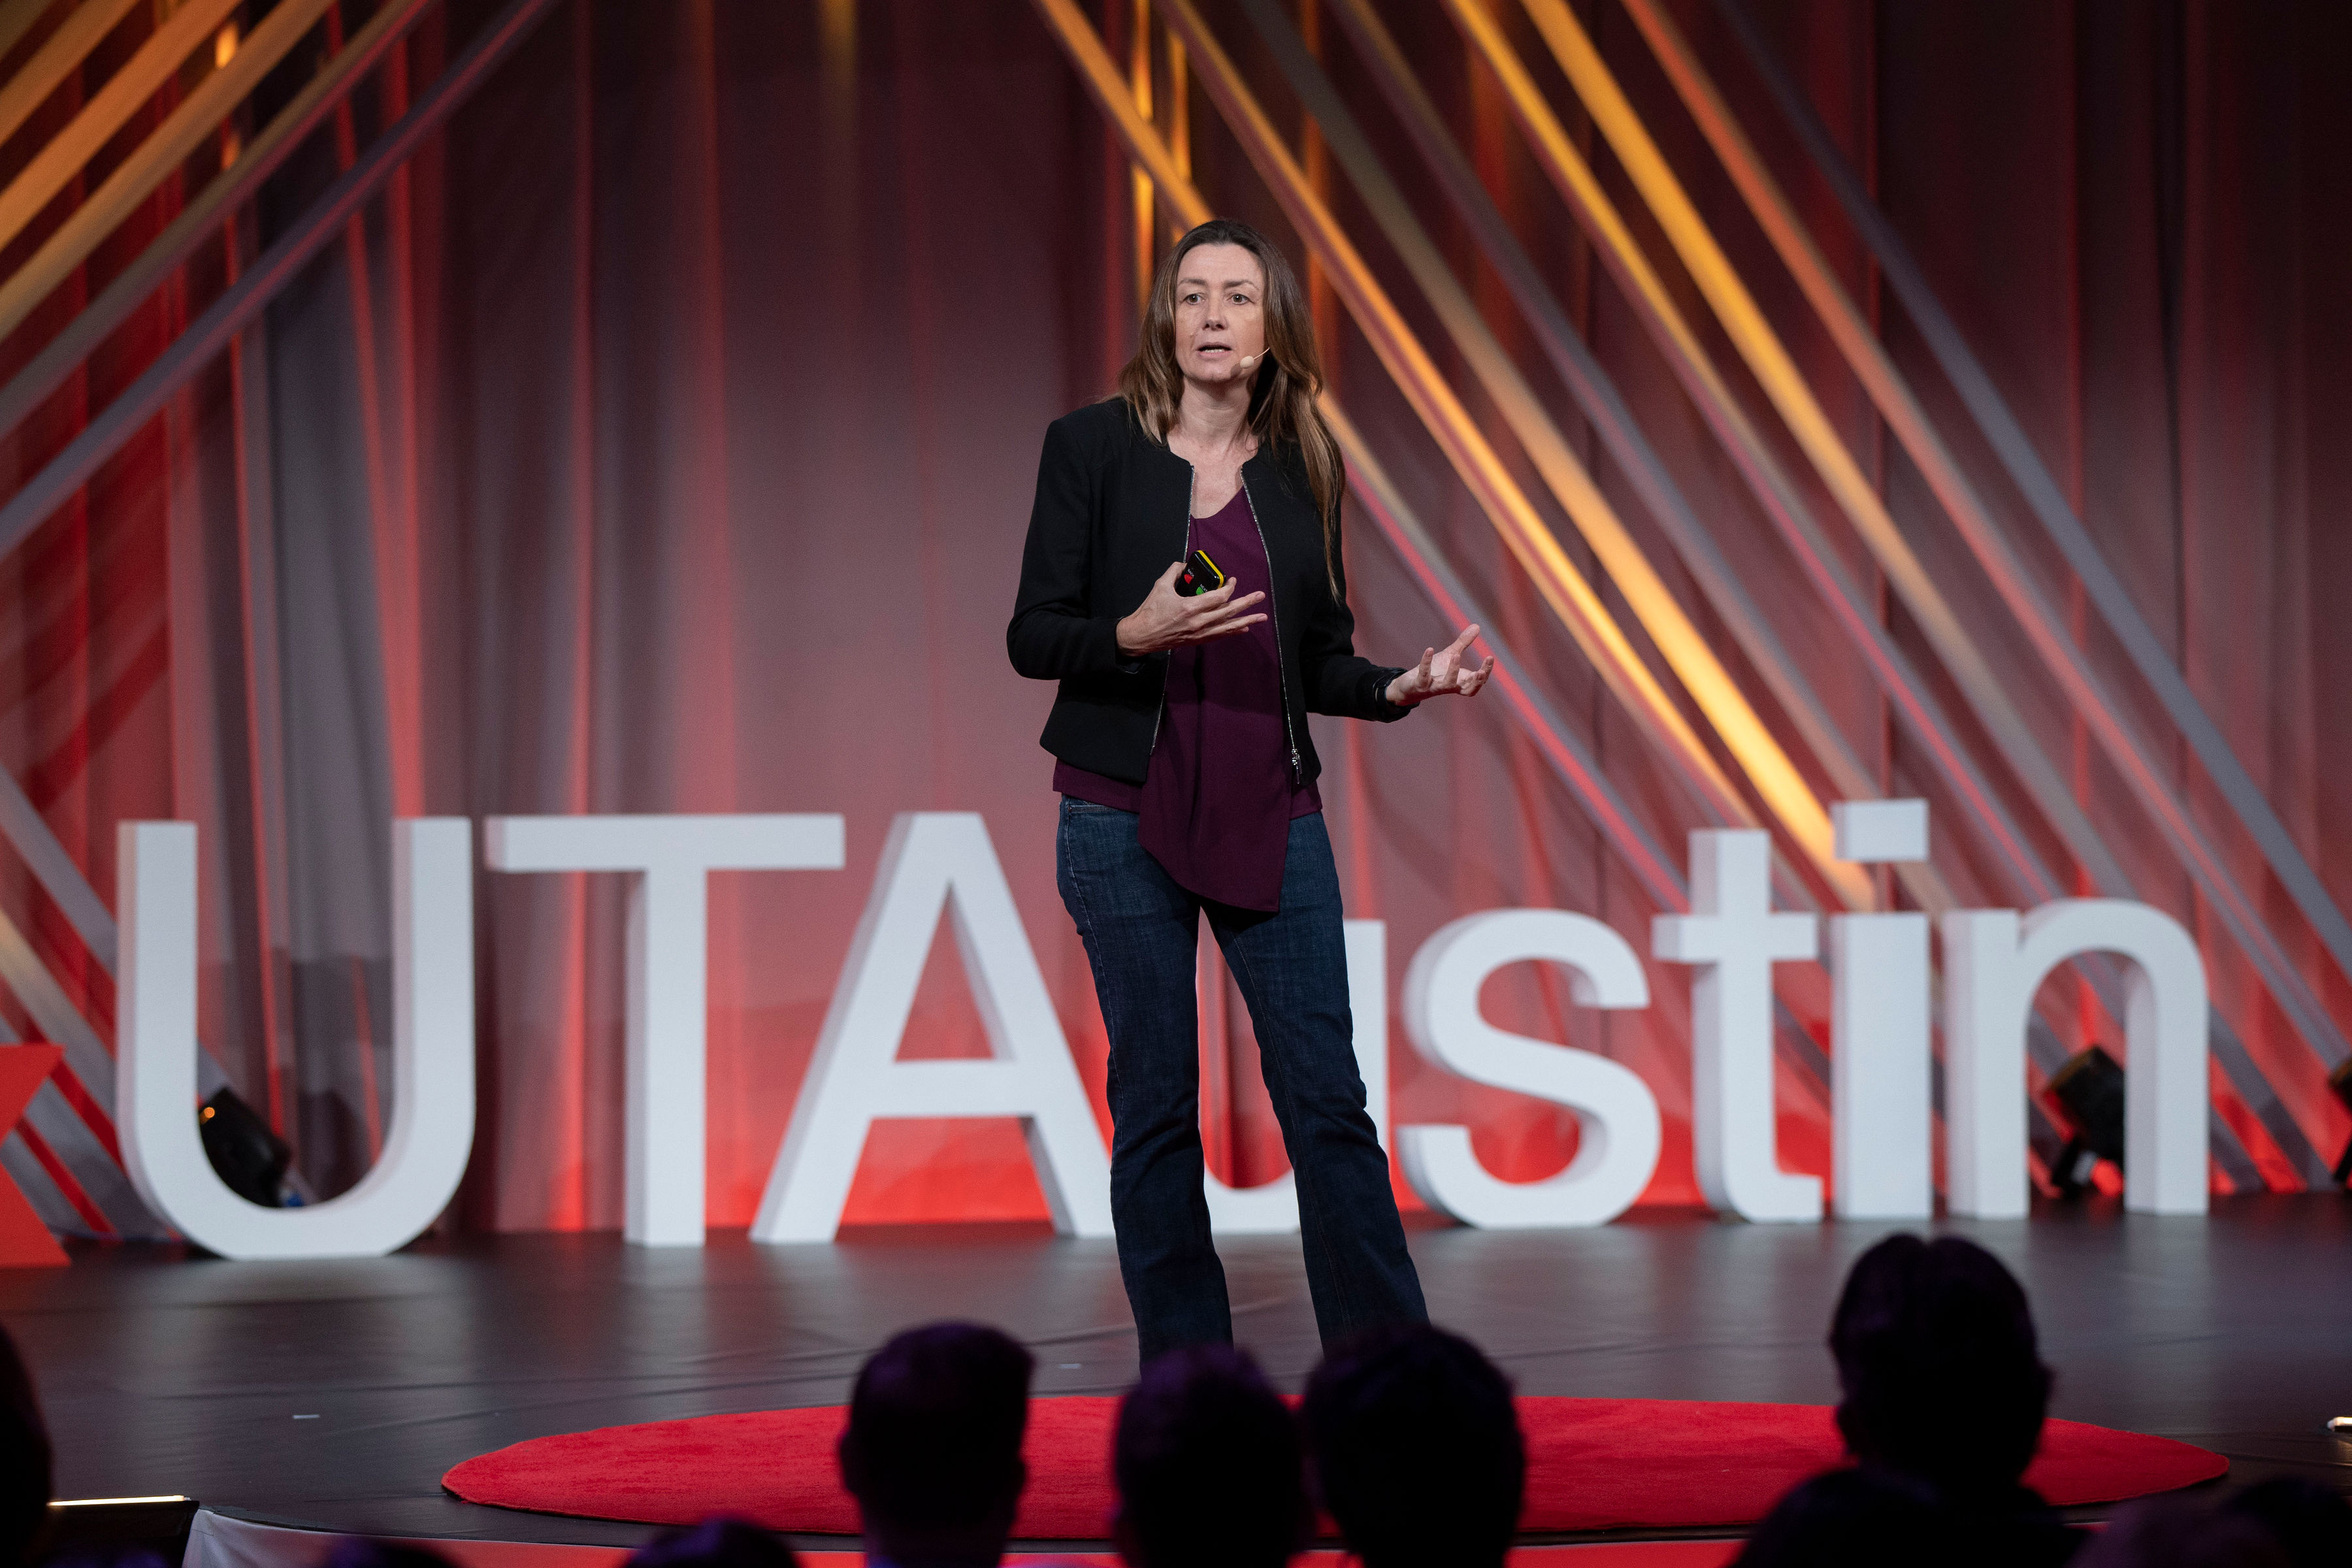 Karen Willcox speaking at the TEDxUTAustin Conference that took place on March 05 2022